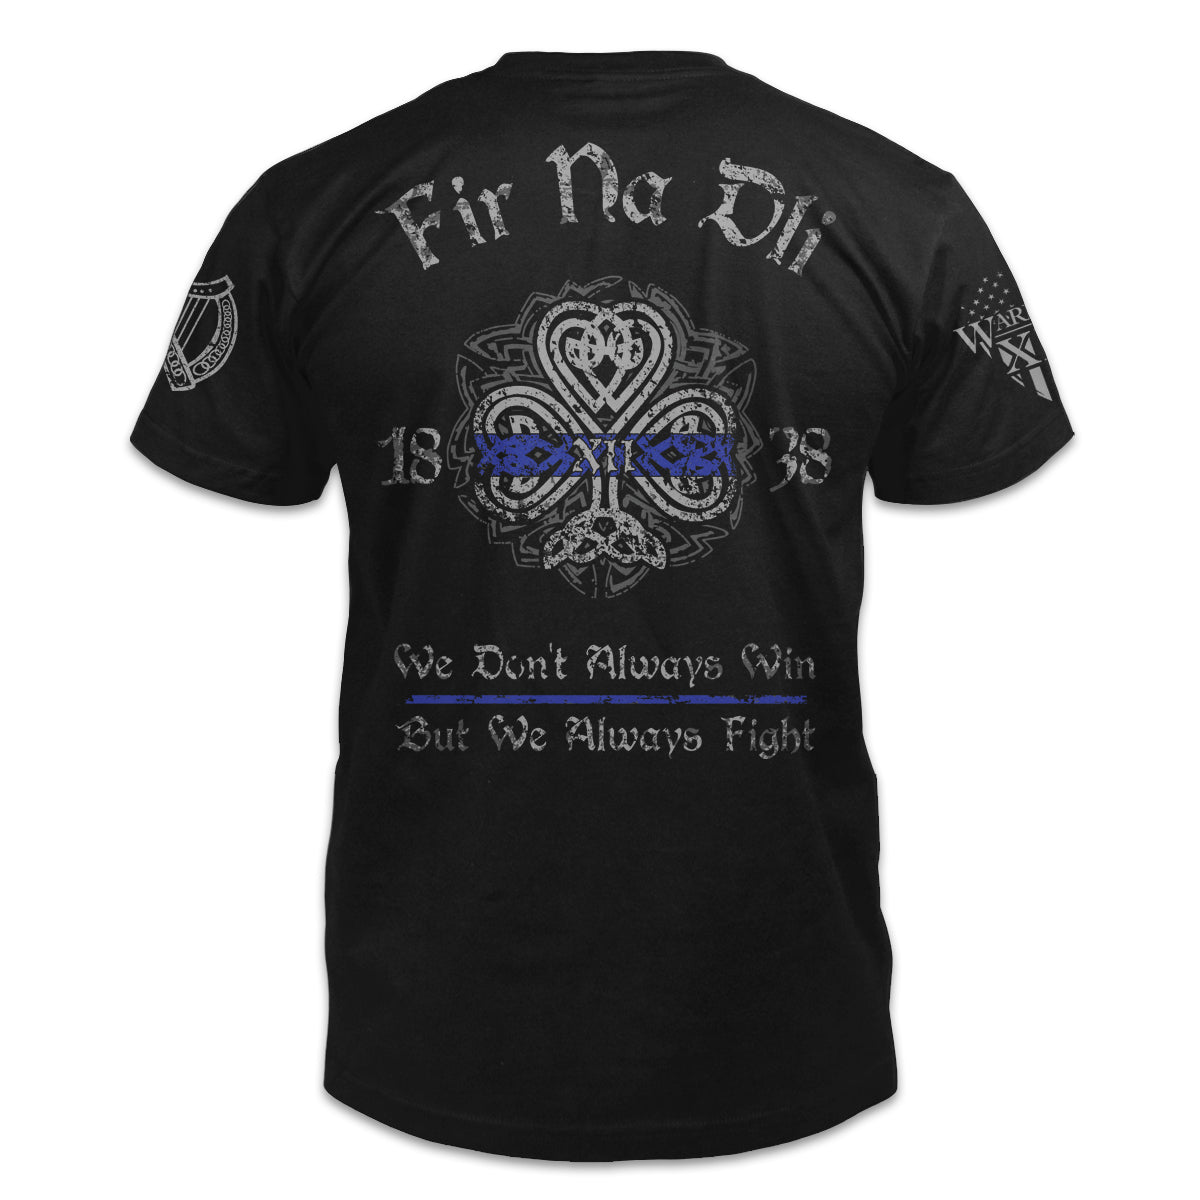 A black t-shirt paying tribute to history and traditions of Irish American Law Enforcement and showing true Celtic Pride. Fir Na Dli, meaning, men of law??ç?£ in Gaelic, is written across the back of the shirt.